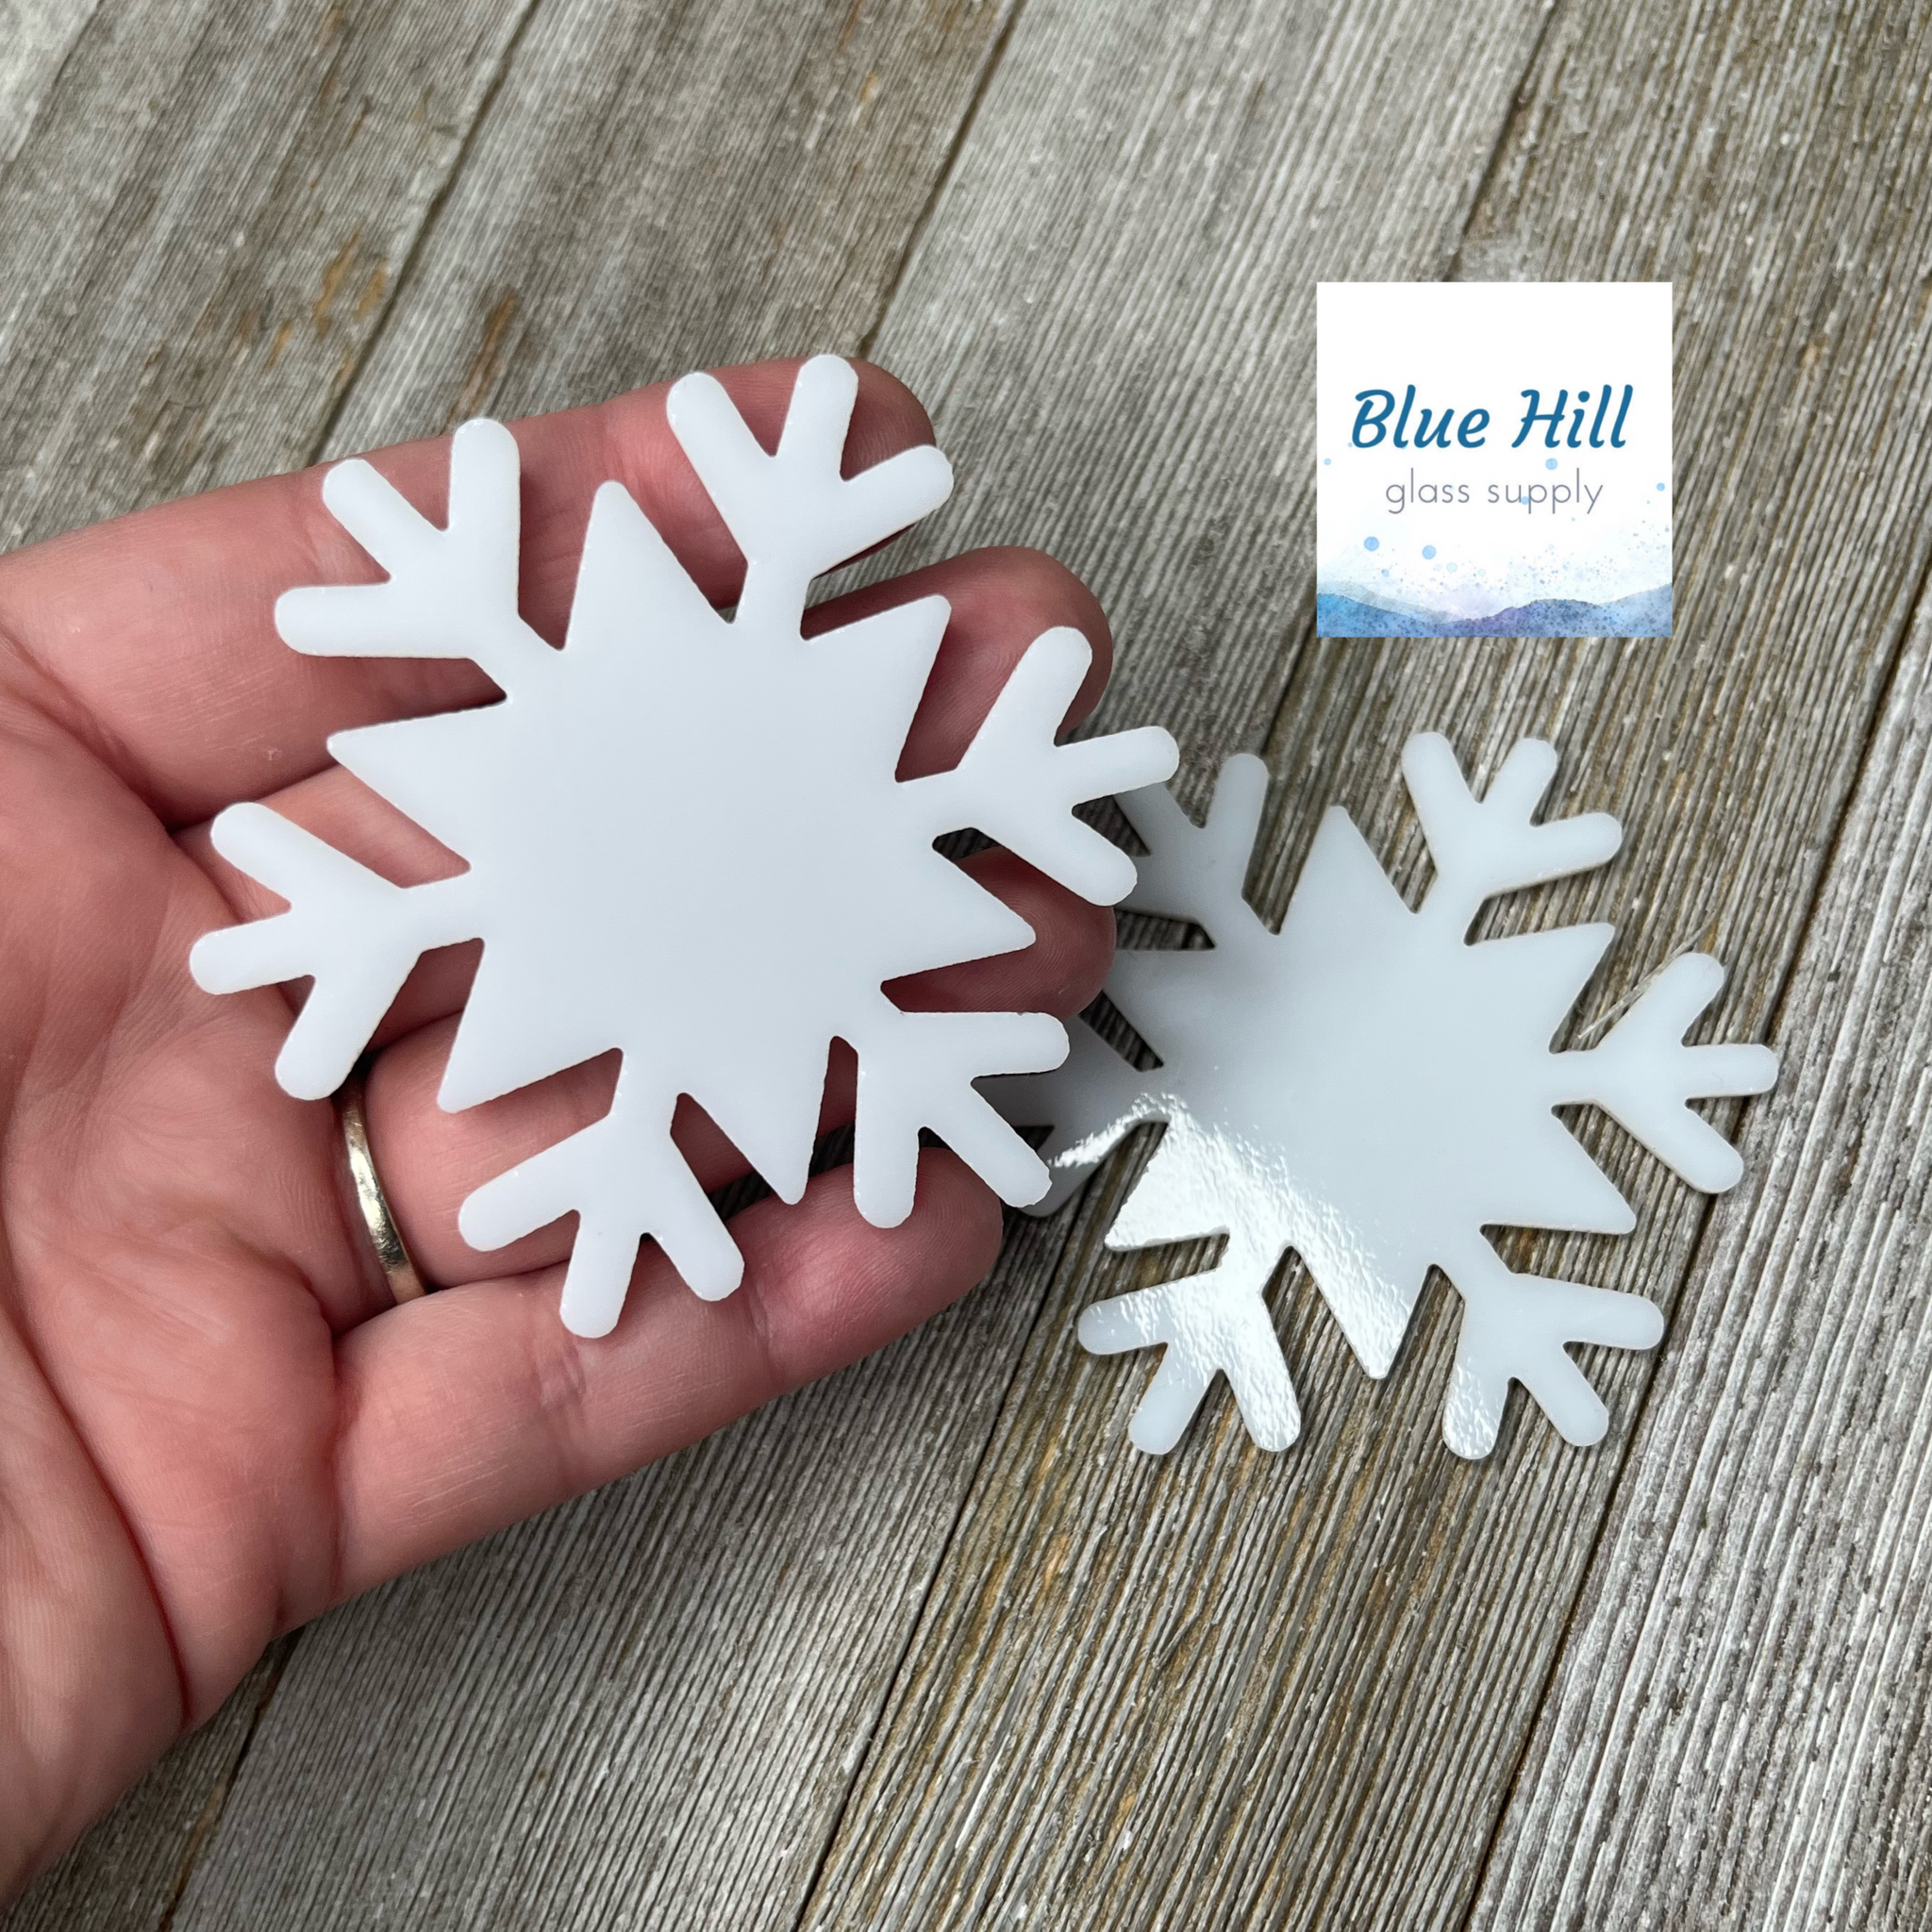 Snowflake 2 pack Precut Glass Shape - Ornaments - Fusible 90 and 96 COE - For Glass Artists - Mosaics - Holiday Precut - Snow